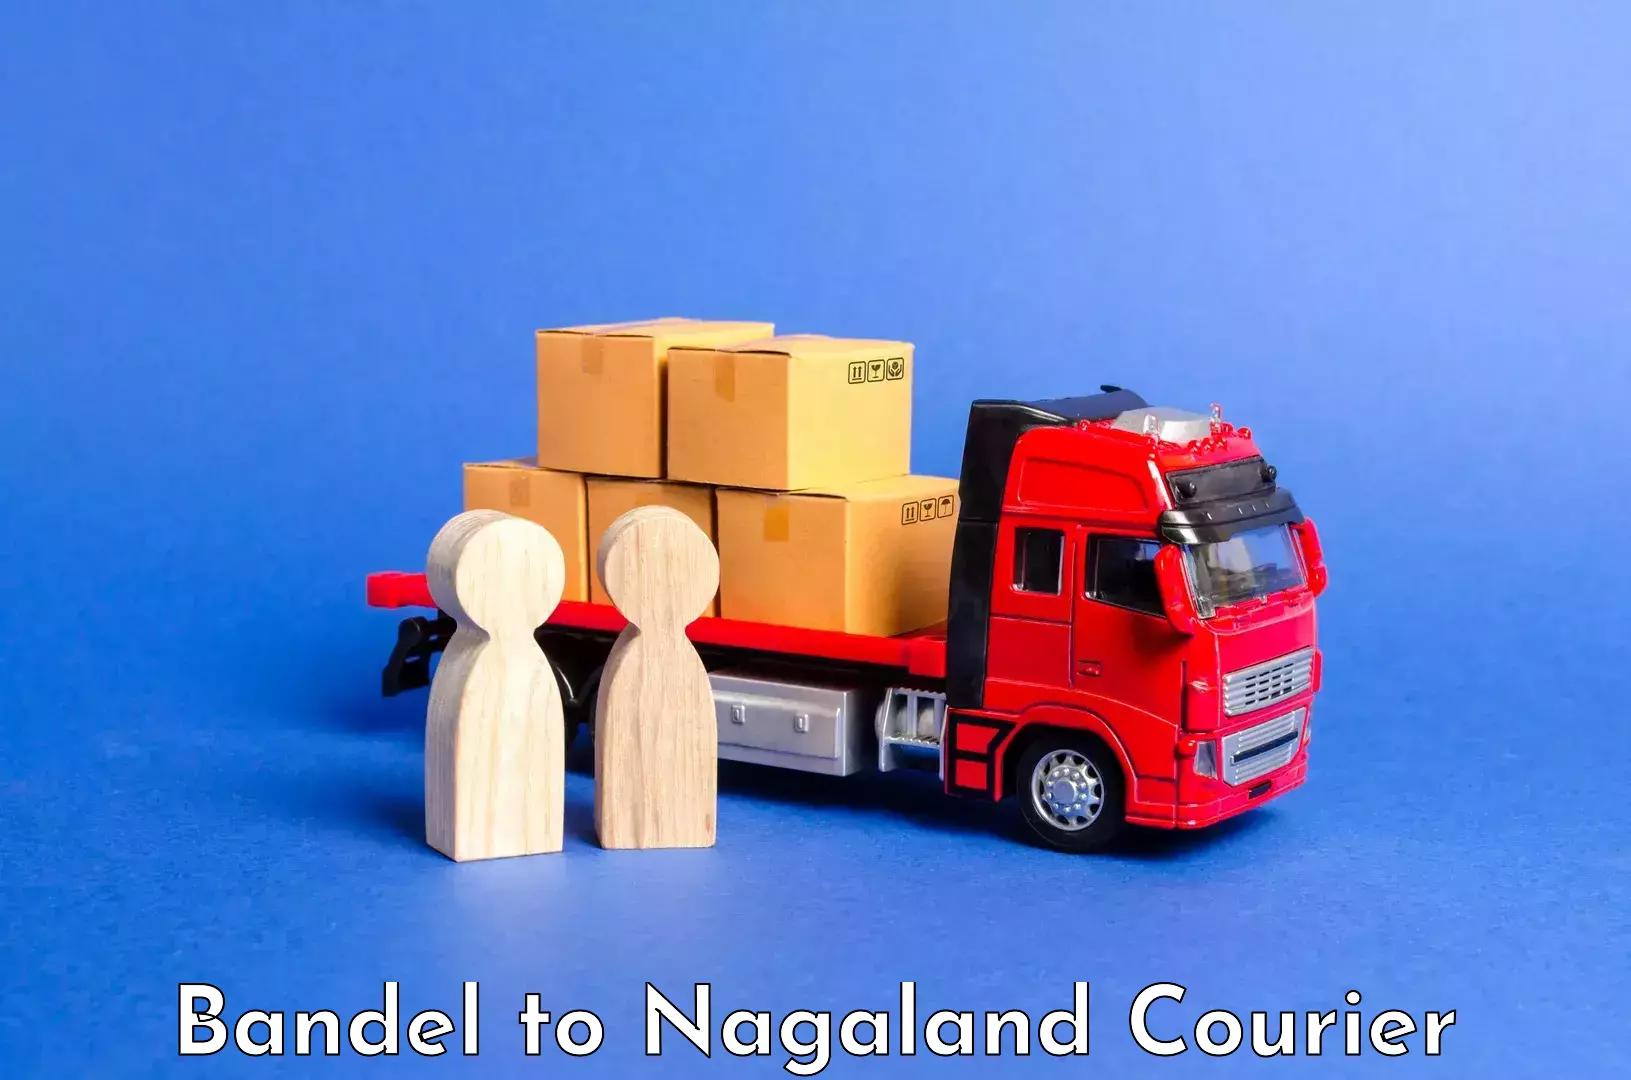 Luggage shipment tracking in Bandel to Nagaland